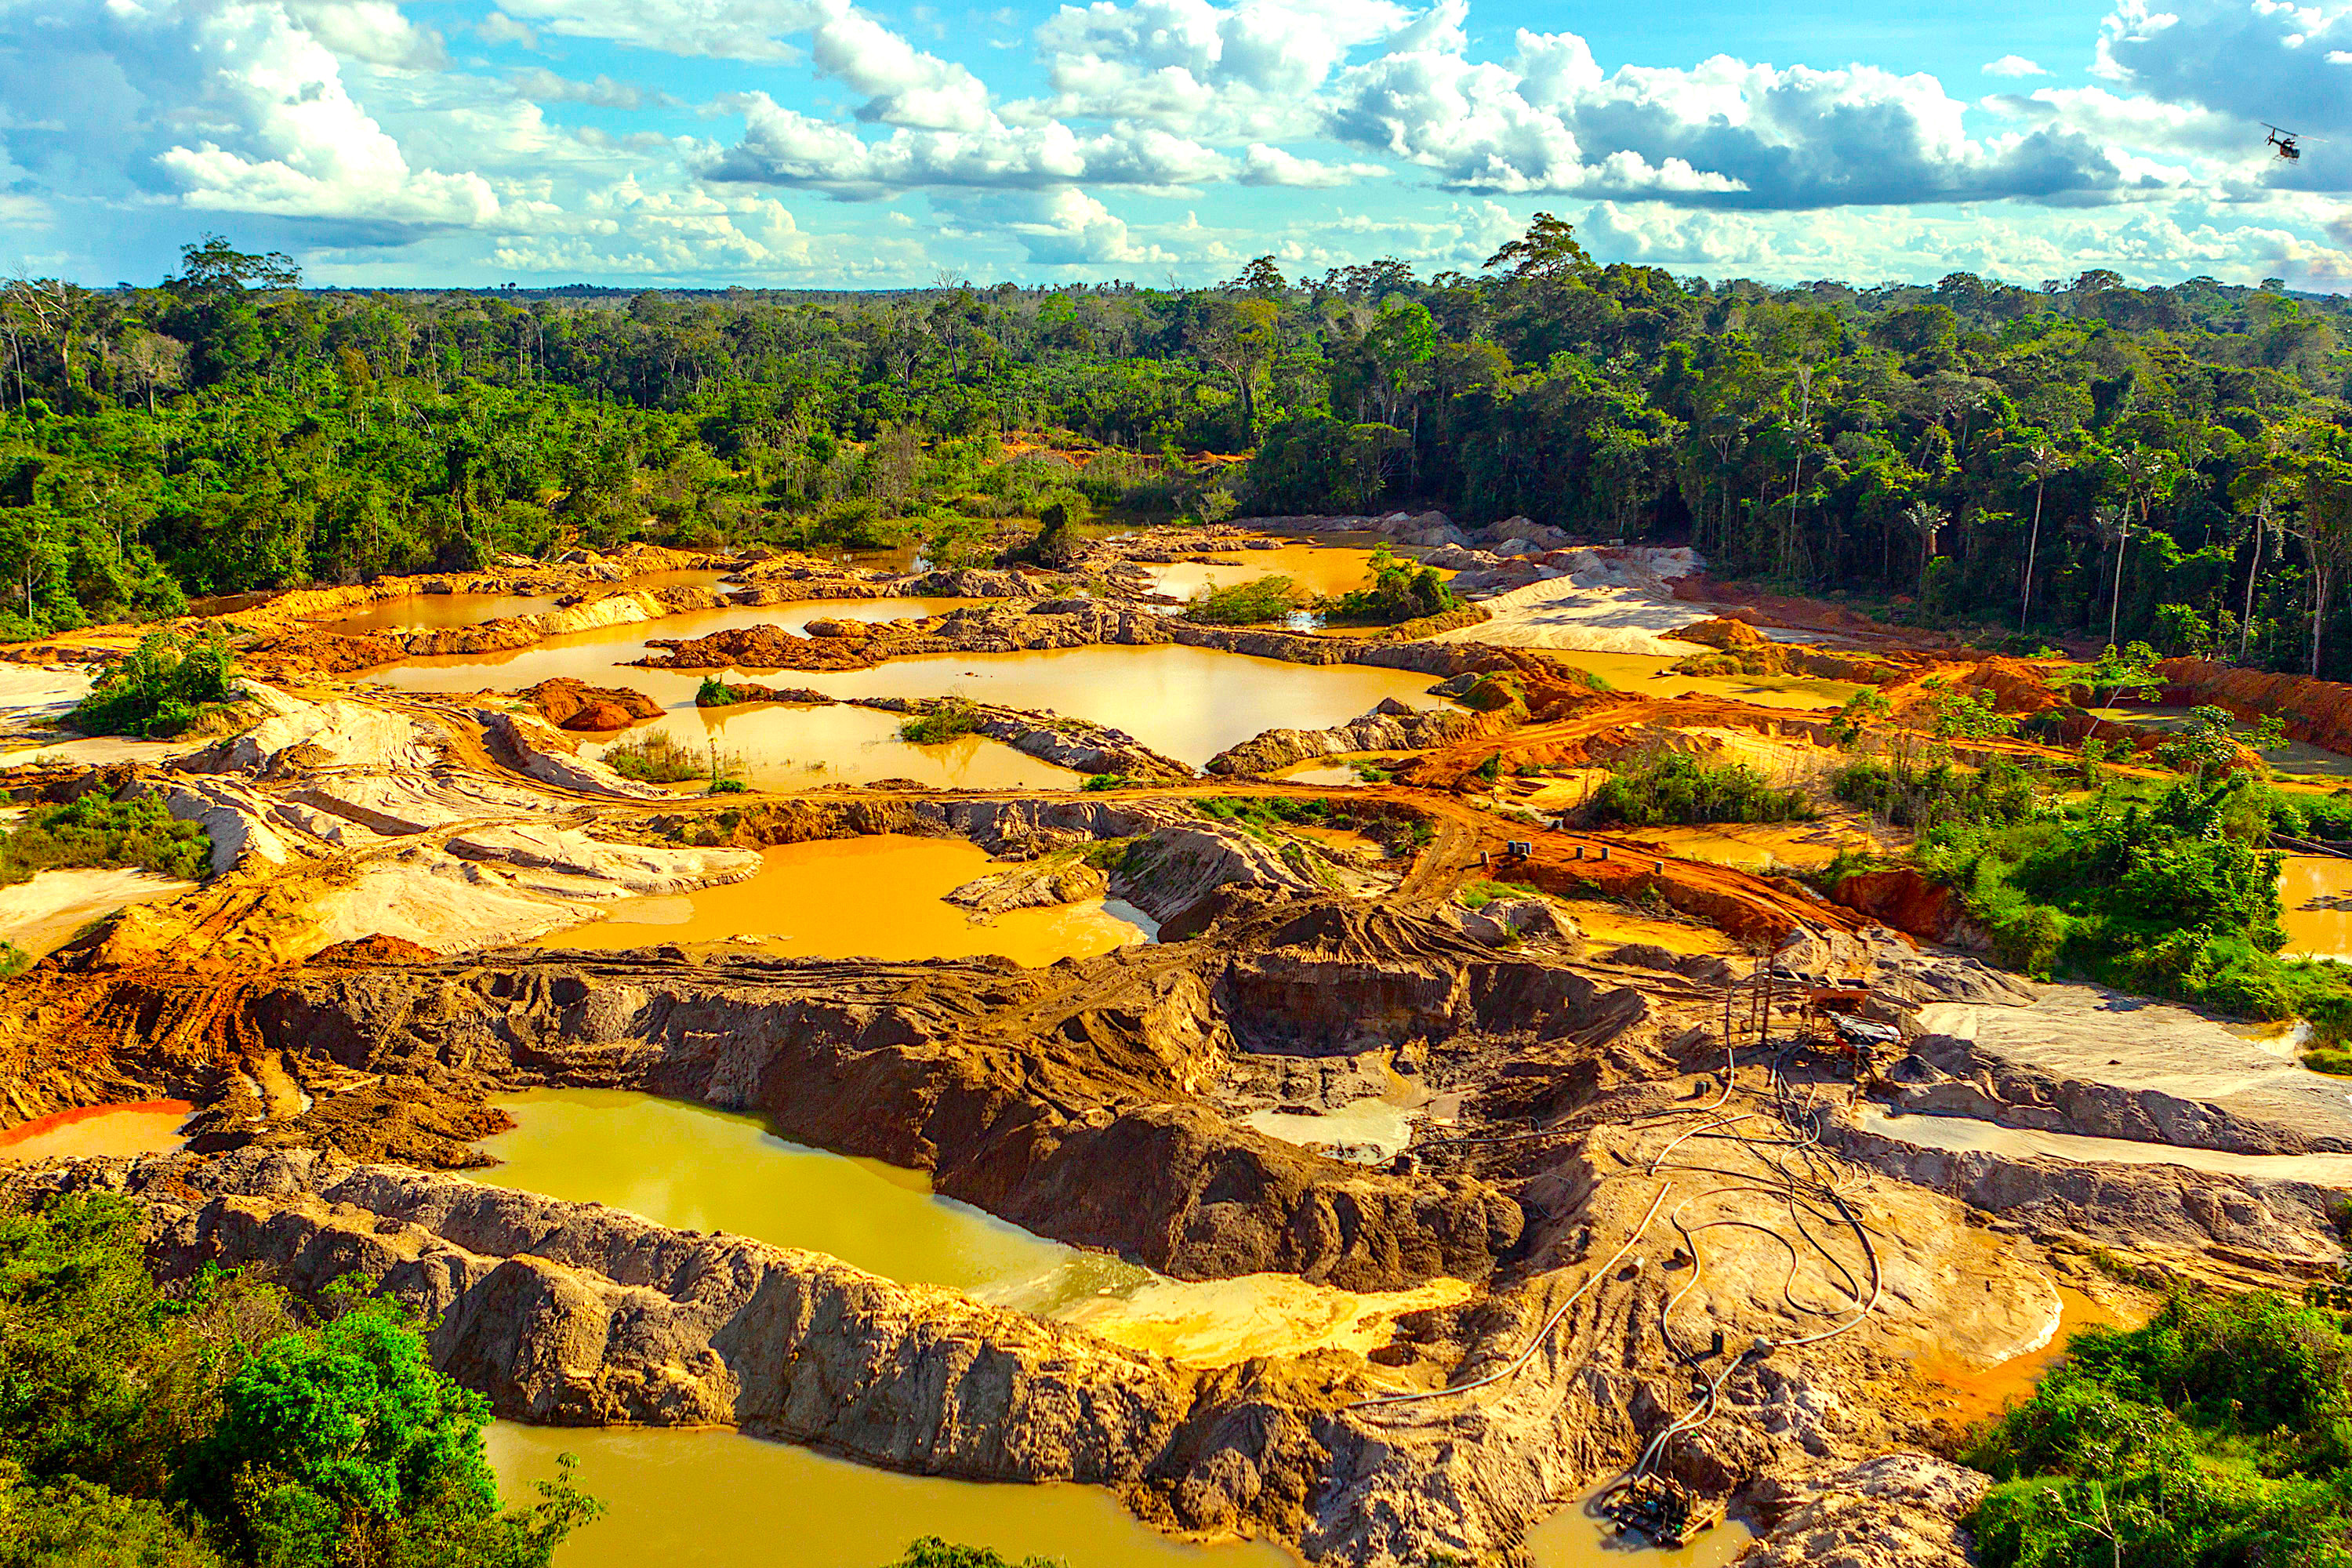 Rainforest scars from illegal mining and deforestation.